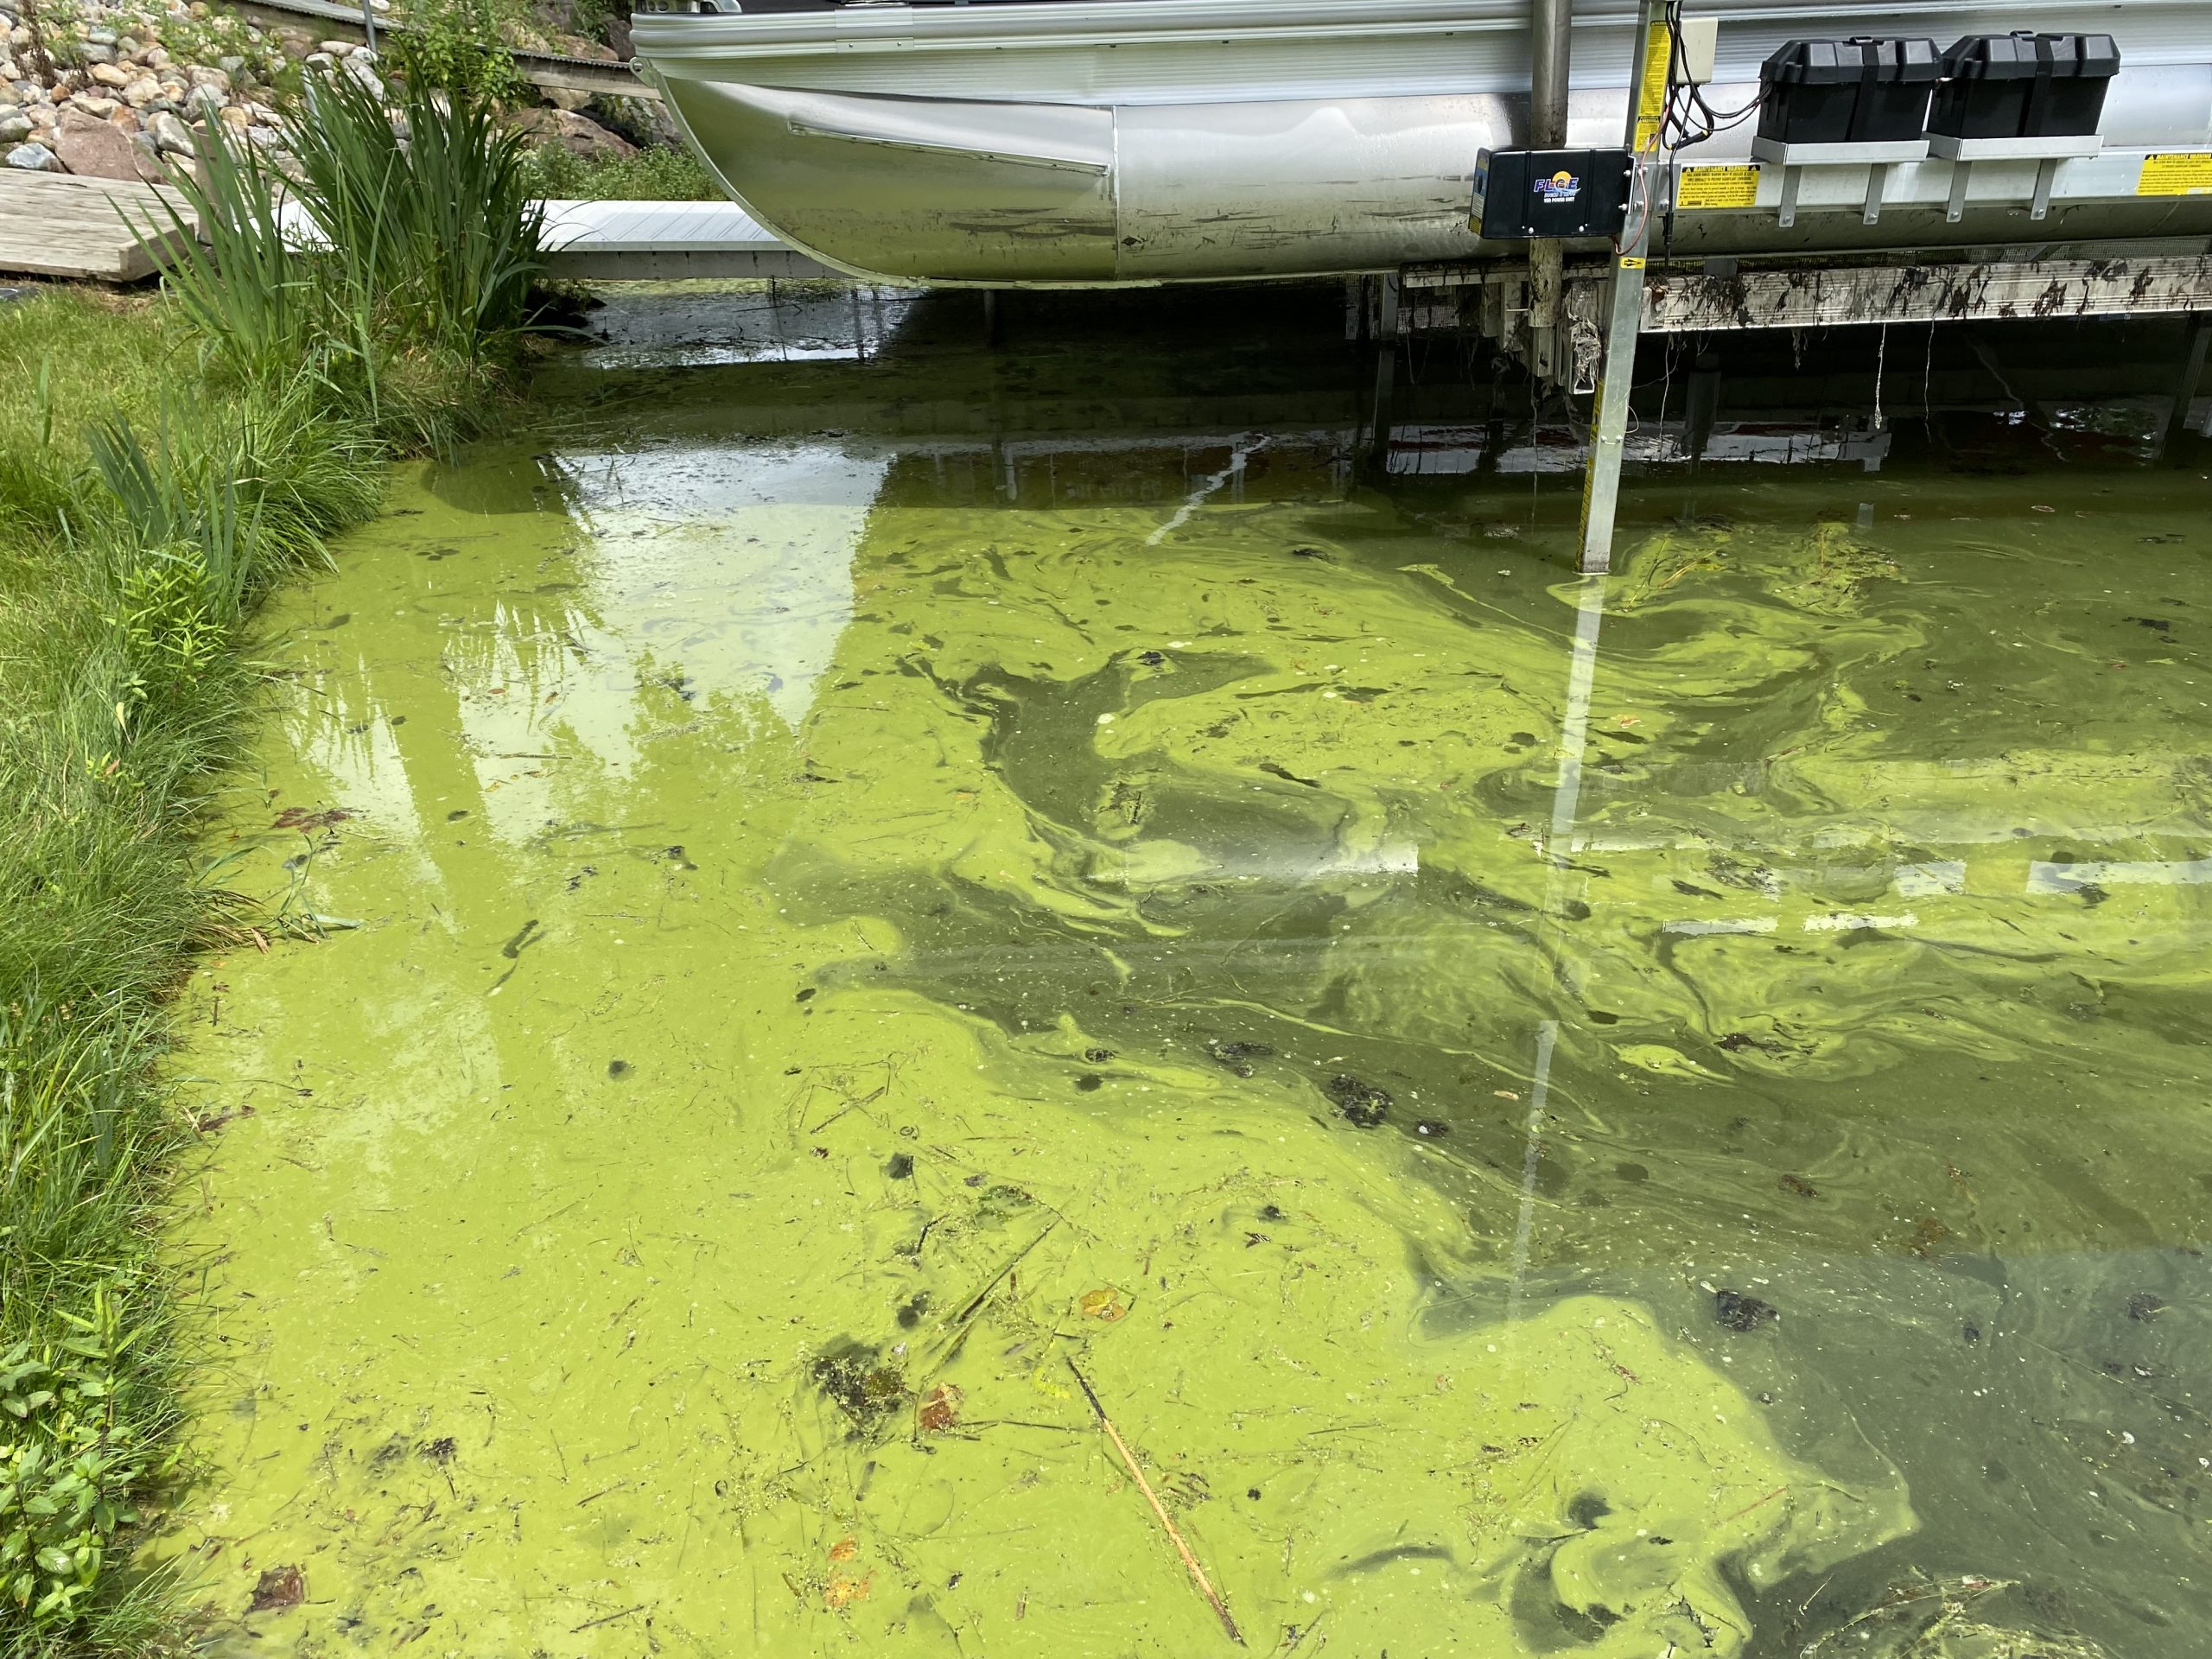 How to identify blue-green algae and what to do about it